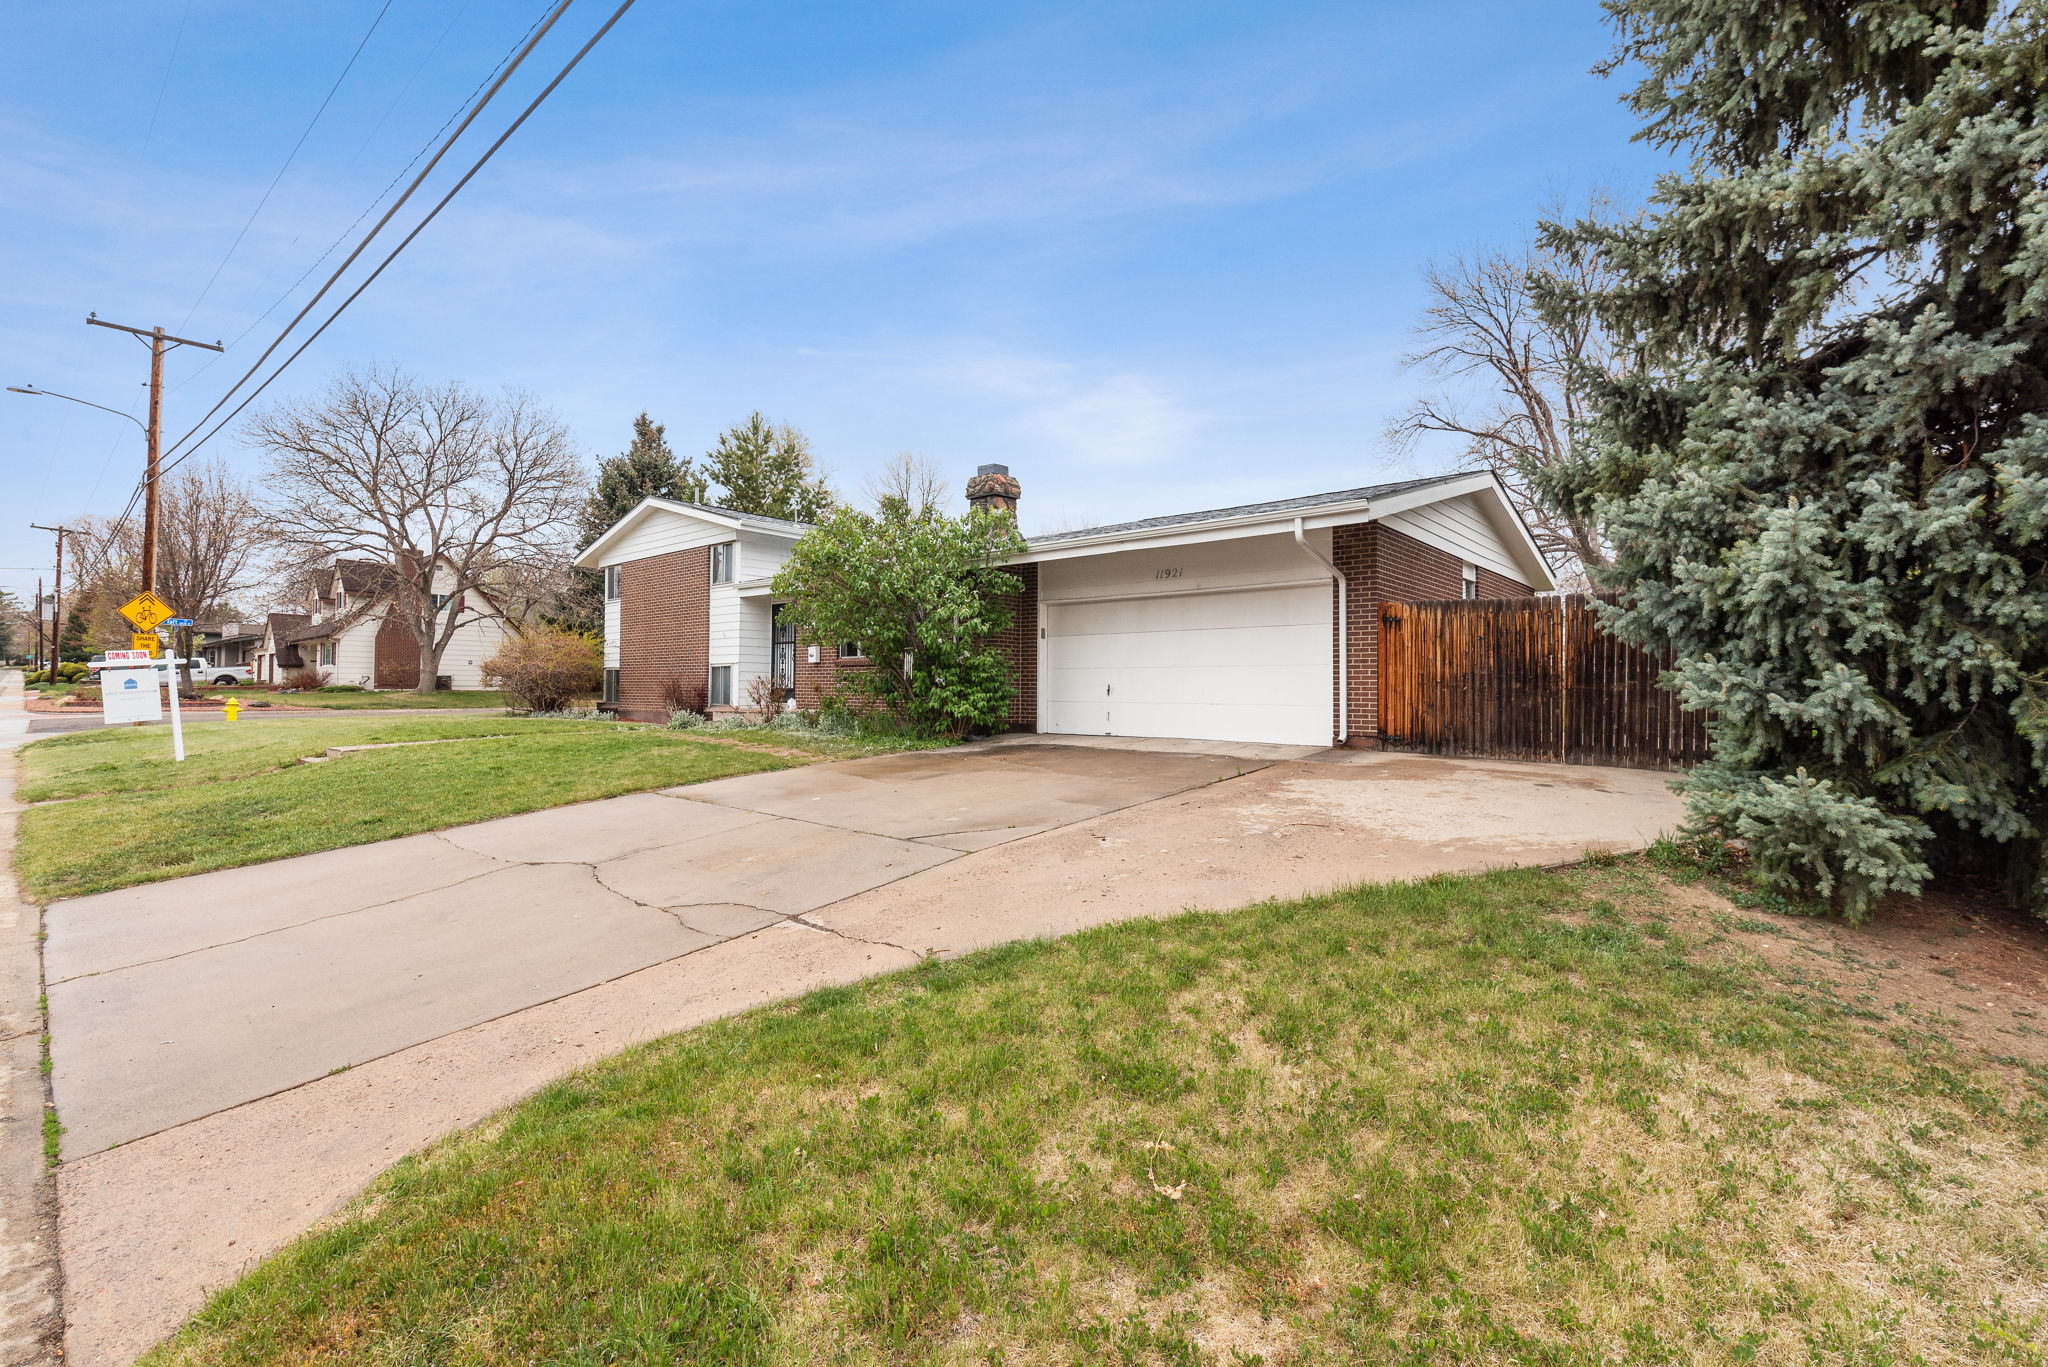  11921 W 60th Ave, Arvada, CO 80004, US Photo 2